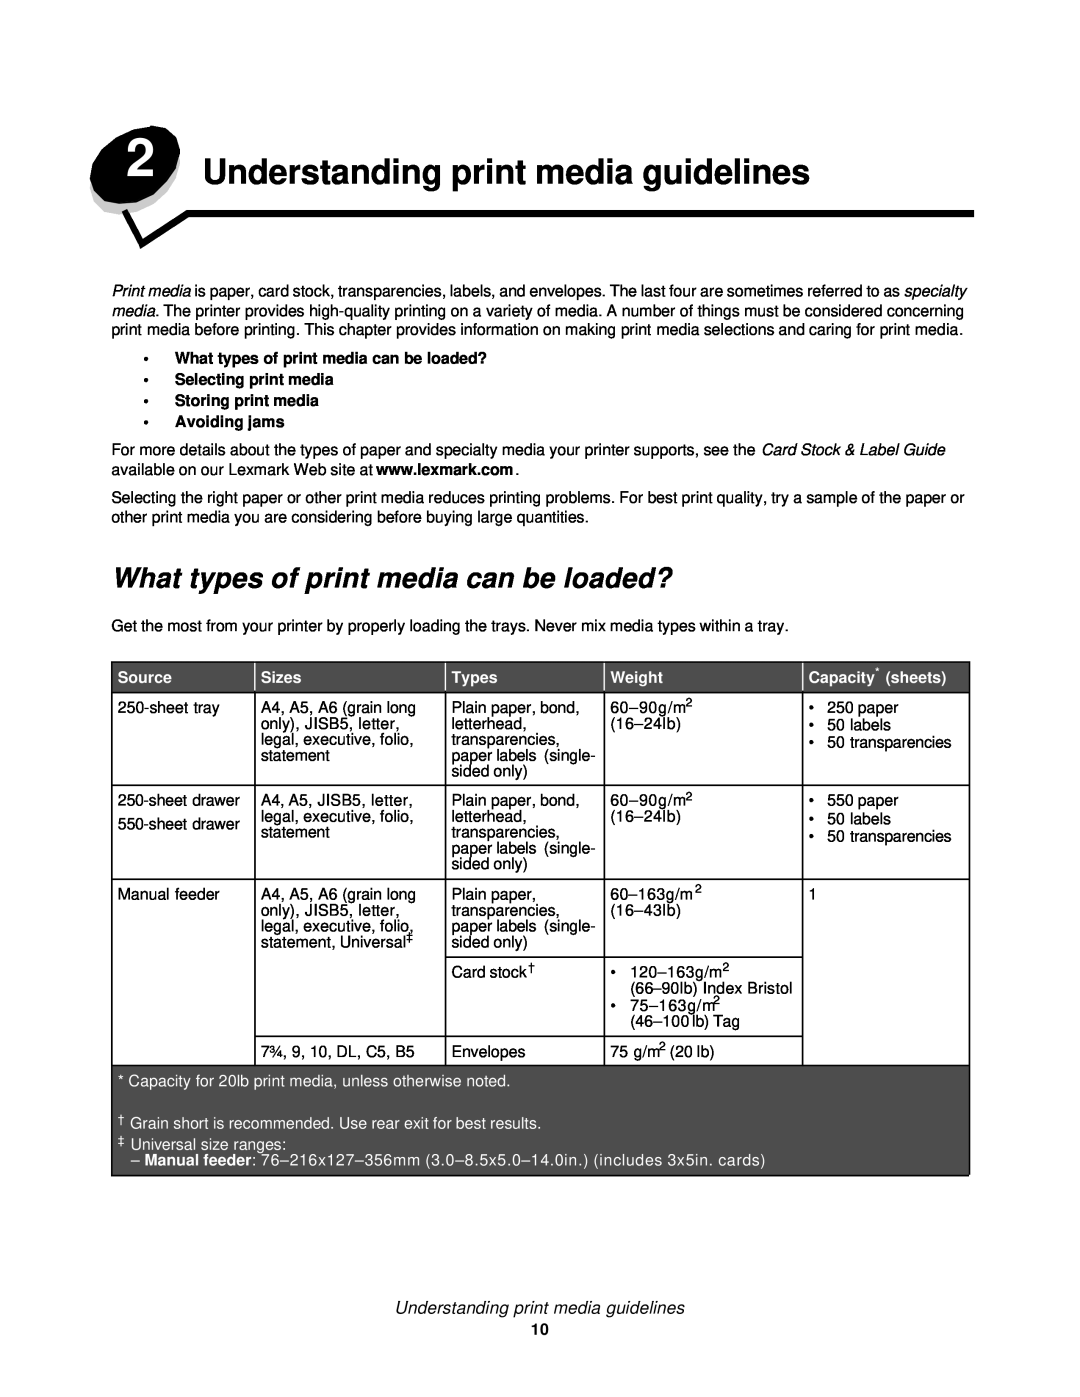 Lexmark 350d Understanding print media guidelines, What types of print media can be loaded?, Source, Sizes, Types, Weight 